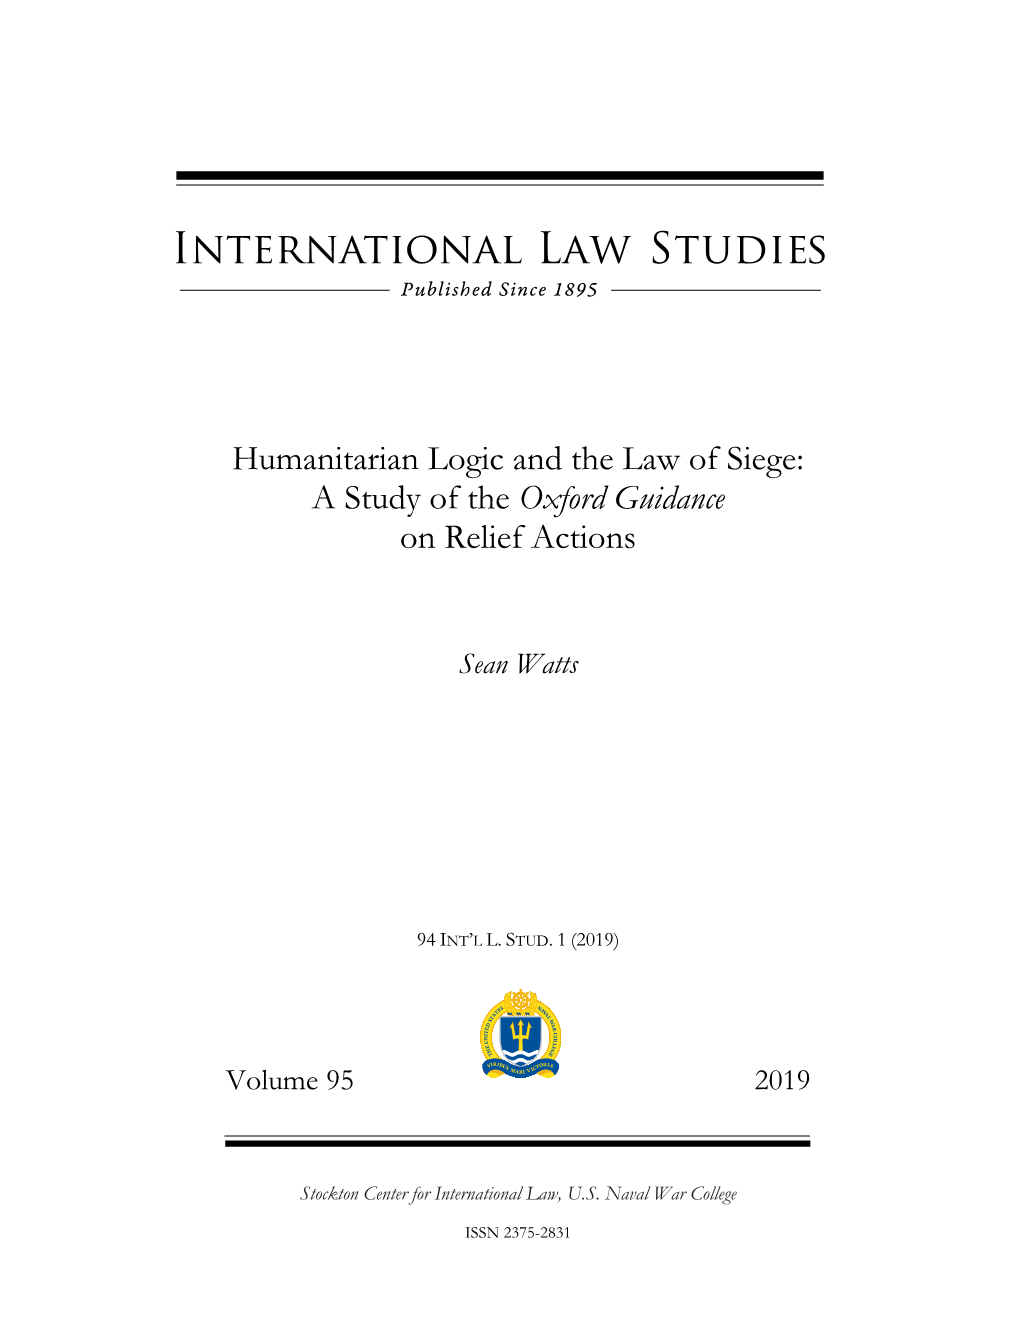 Humanitarian Logic and the Law of Siege: a Study of the Oxford Guidance on Relief Actions